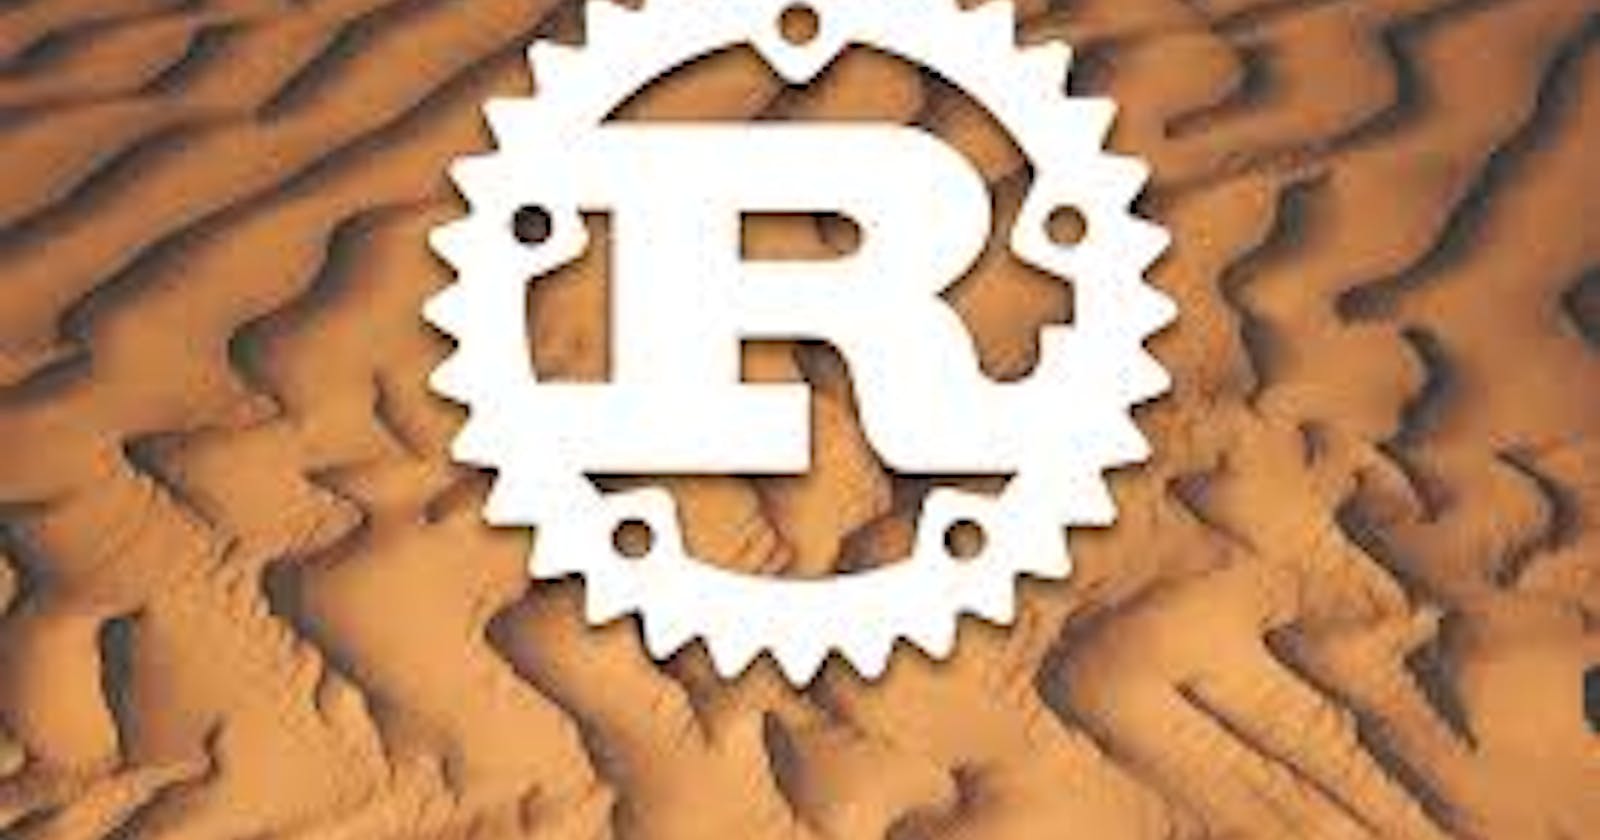 Basic Syntax of Rust